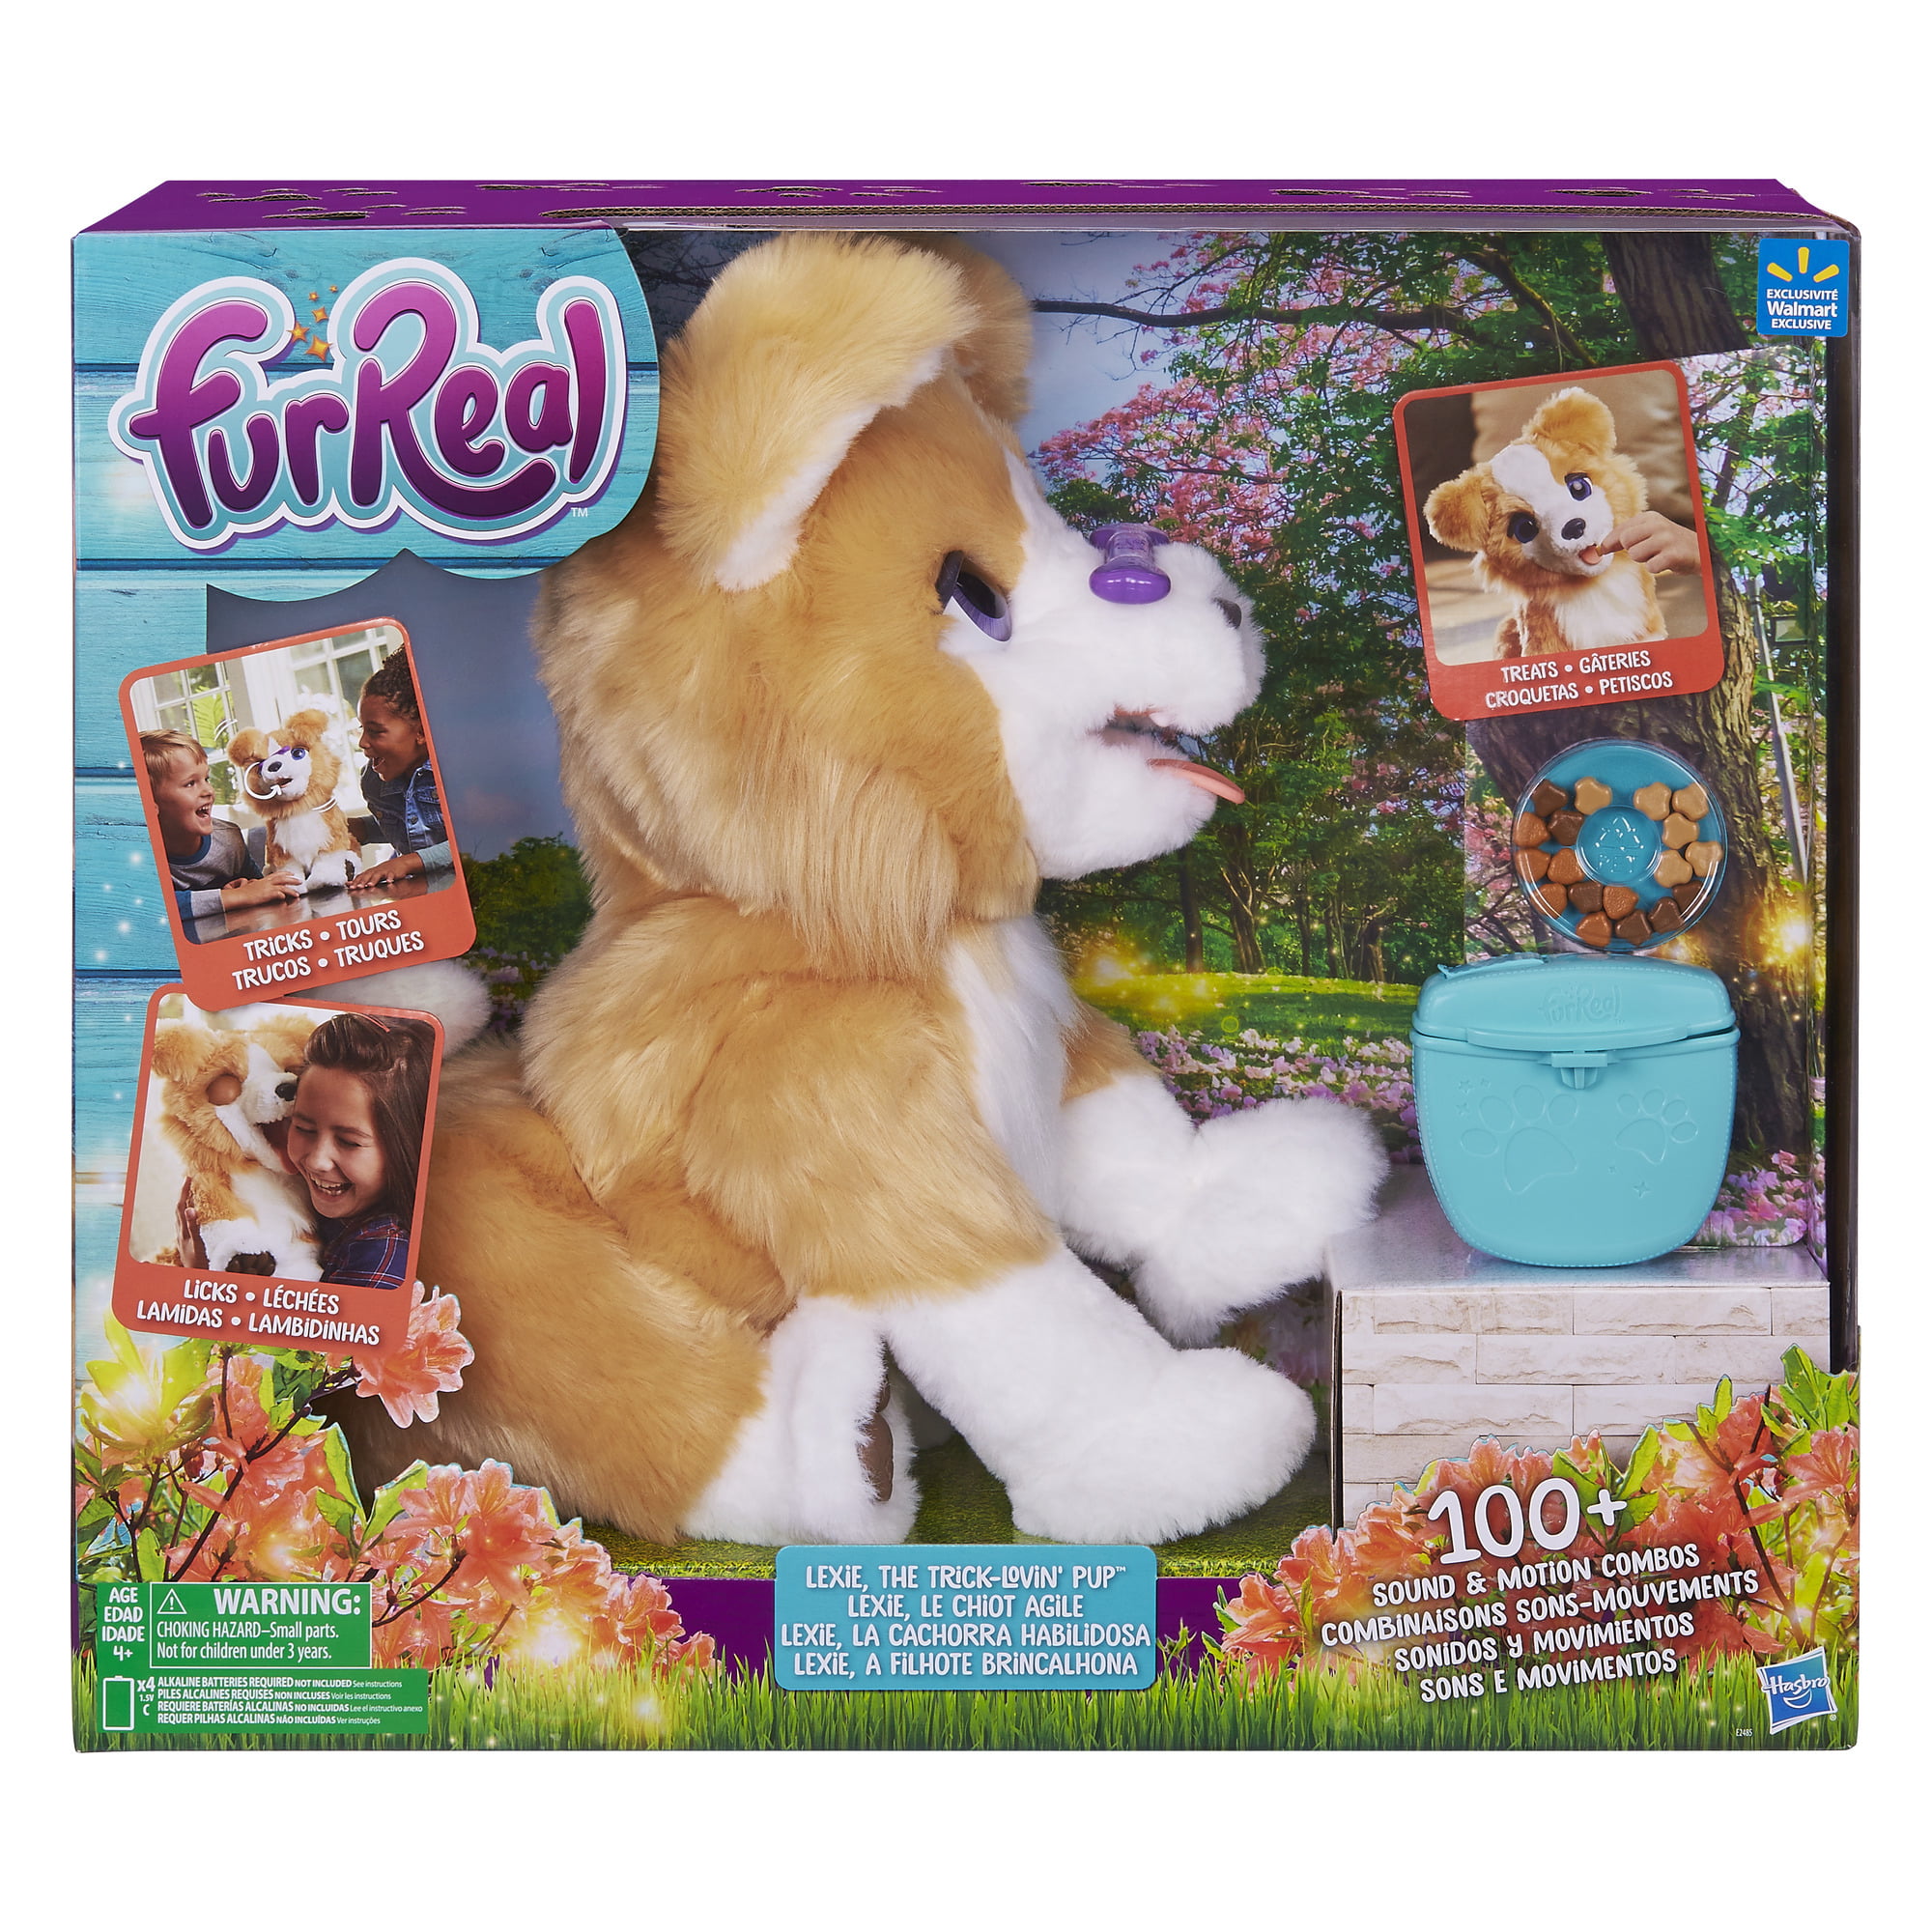 FurReal Ricky the Trick-Lovin Pup 100 Sounds & Motion Combos New in Box Hasbro 